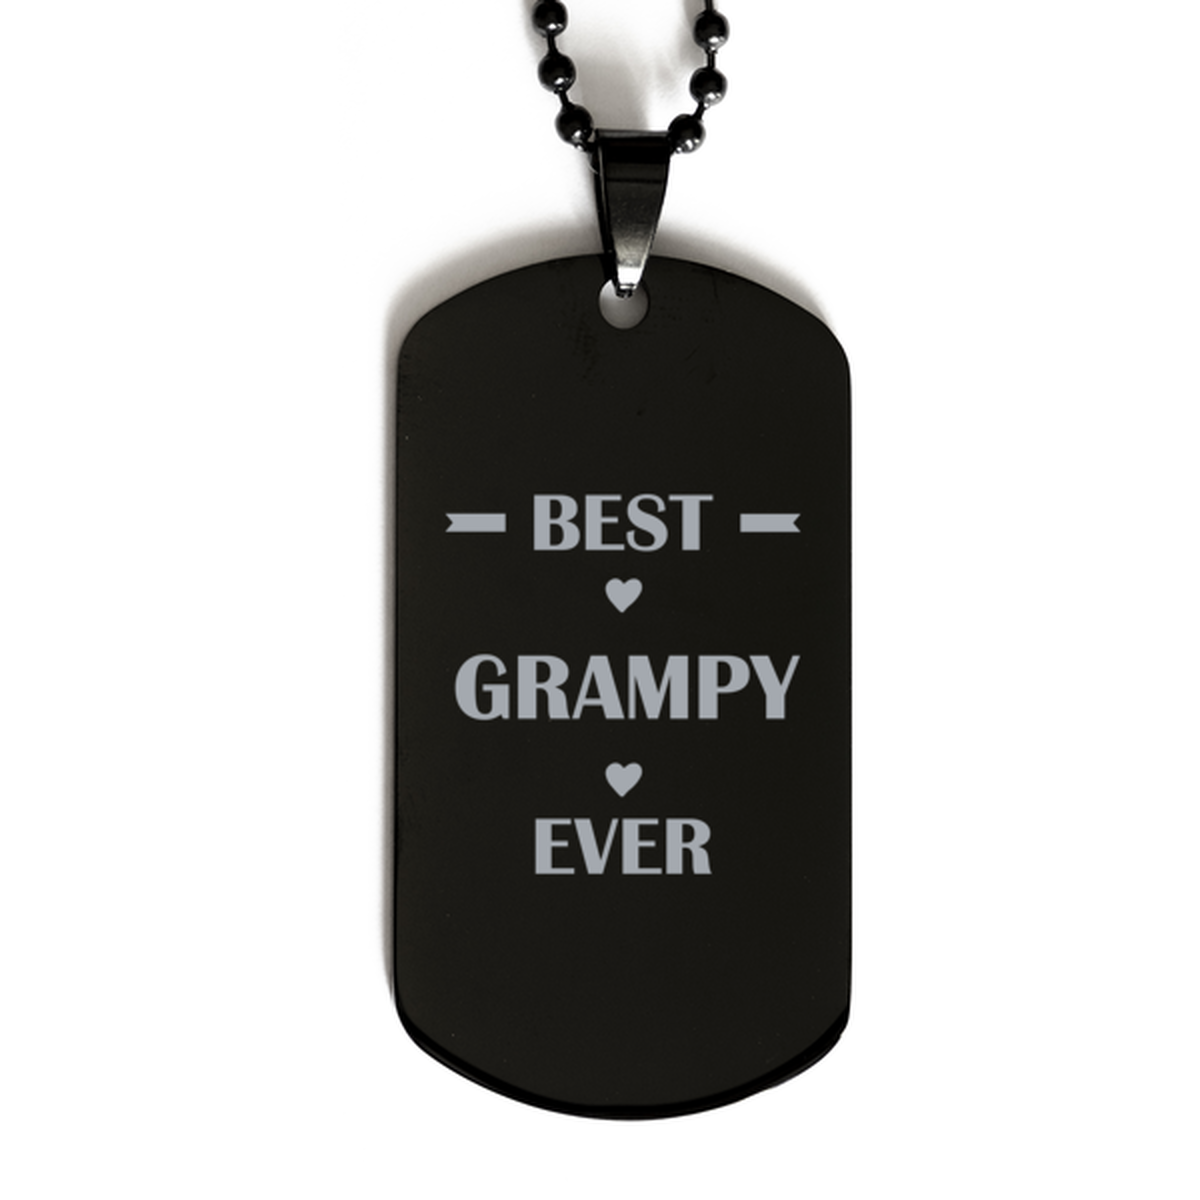 Best Grampy Ever Grampy Gifts, Funny Black Dog Tag For Grampy, Birthday Family Presents Engraved Necklace For Men